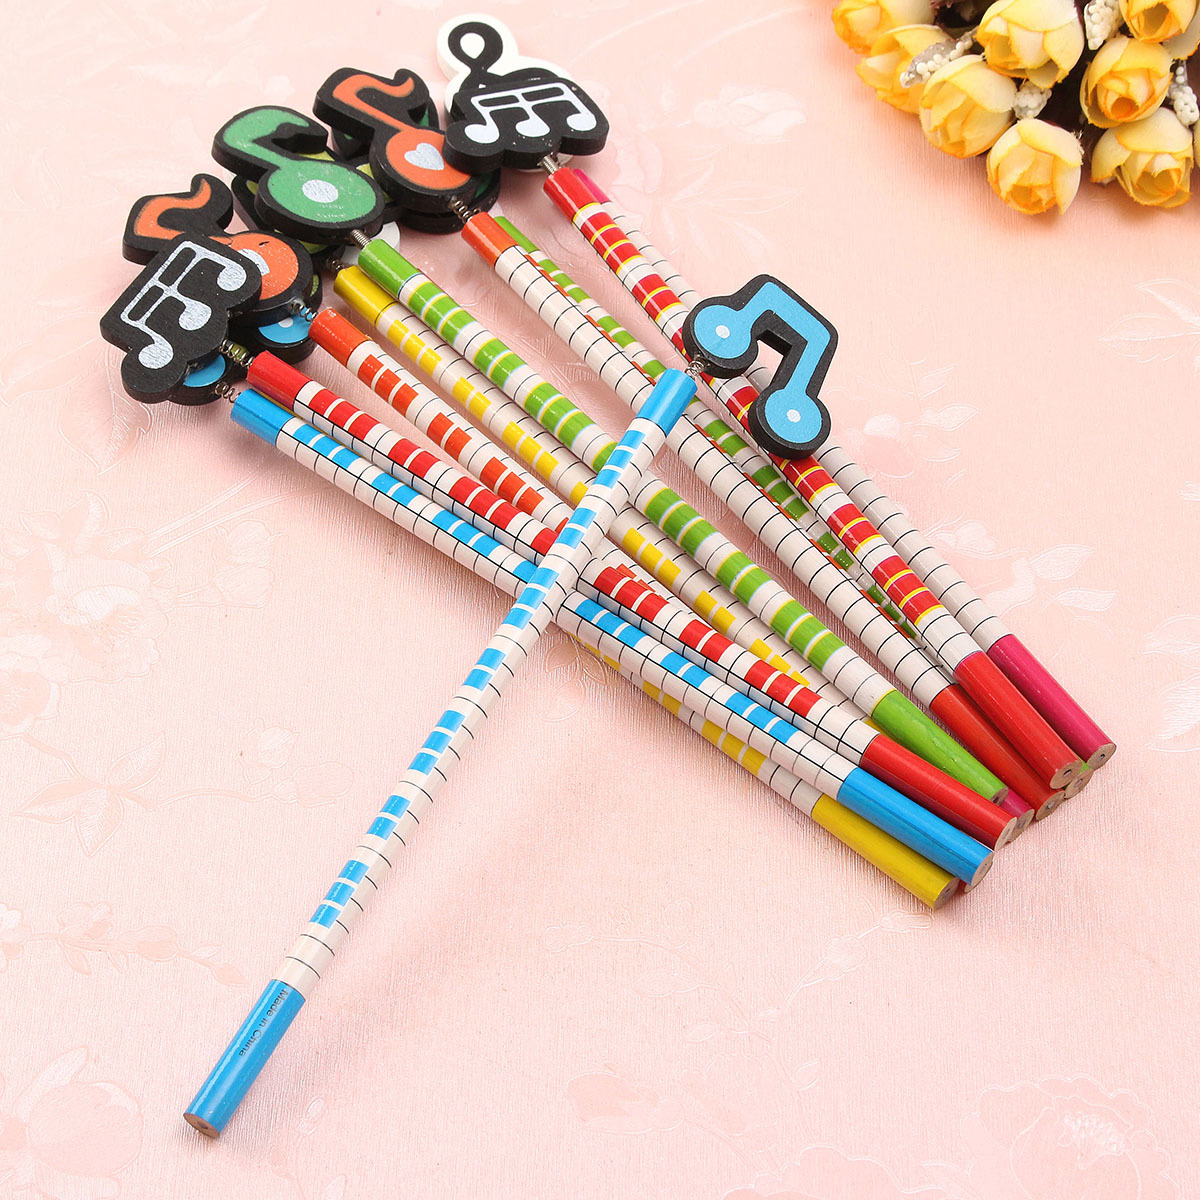 12 Pcs Wooden Pencils Musical Note Patterns Cartoon Pencils Writing Painting Stationery Gifts for Children 2